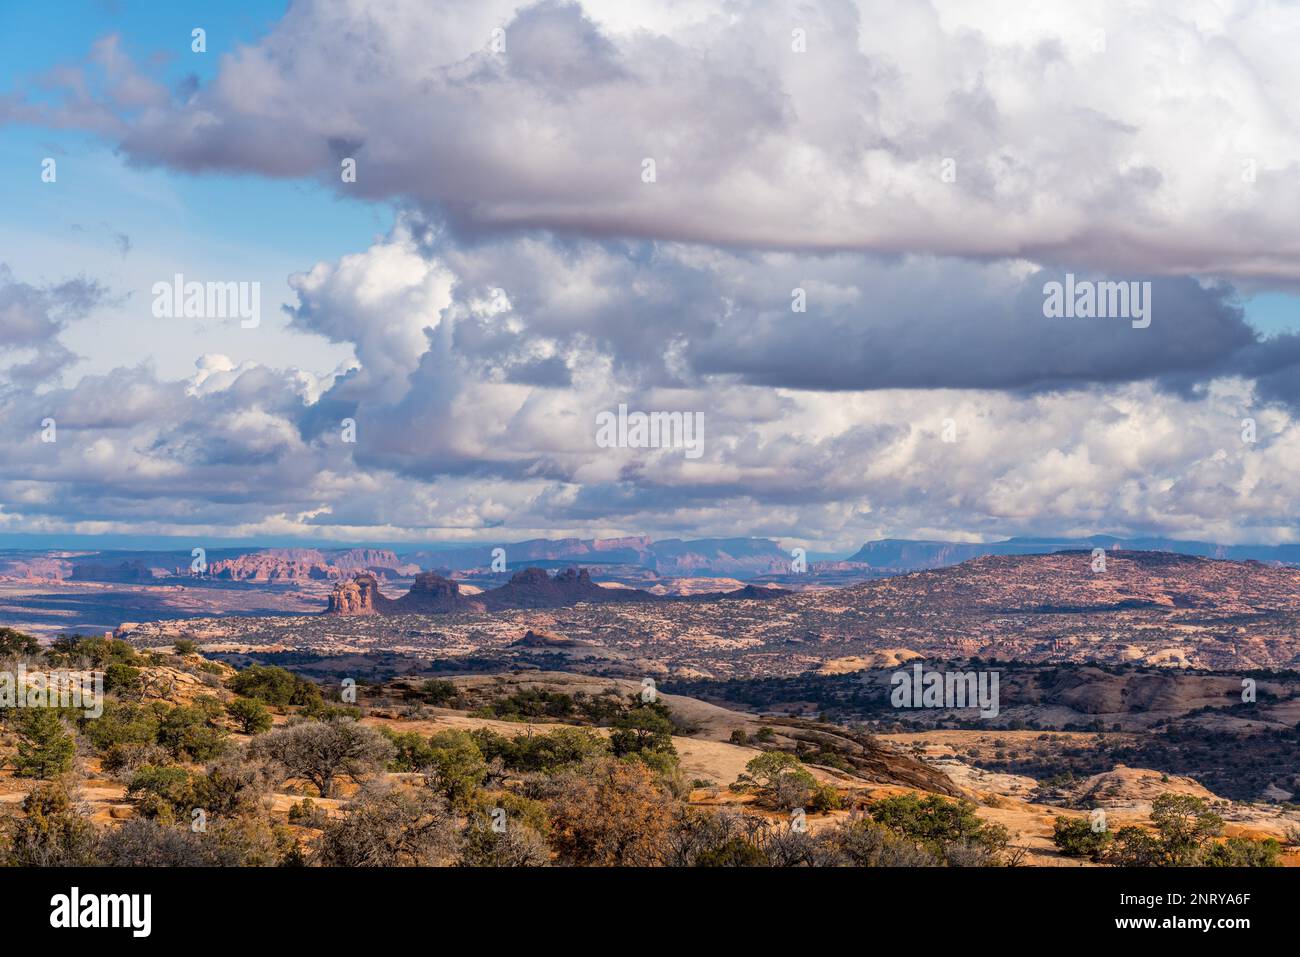 Cumulus clouds over Arth's Pasture, Arth's Rima & distant Arches National Park from the Plateau Viewpoint, Moab, Utah. Stock Photo